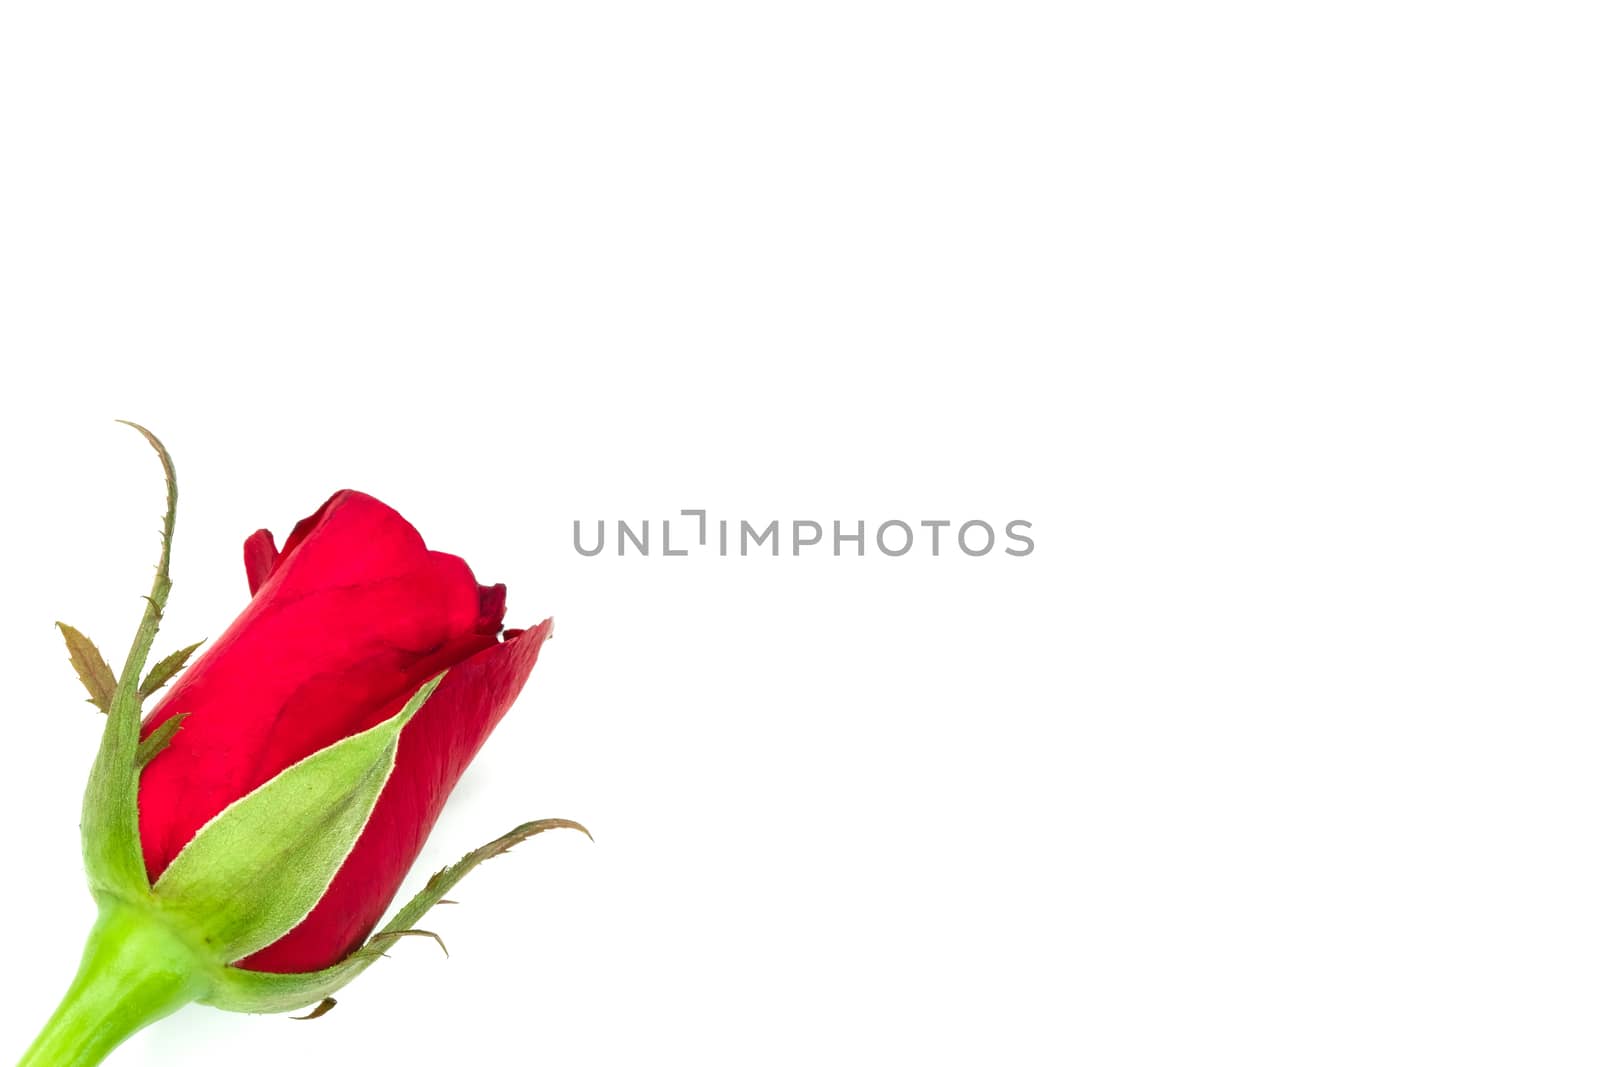 Single blooming red rose, isolated on white background